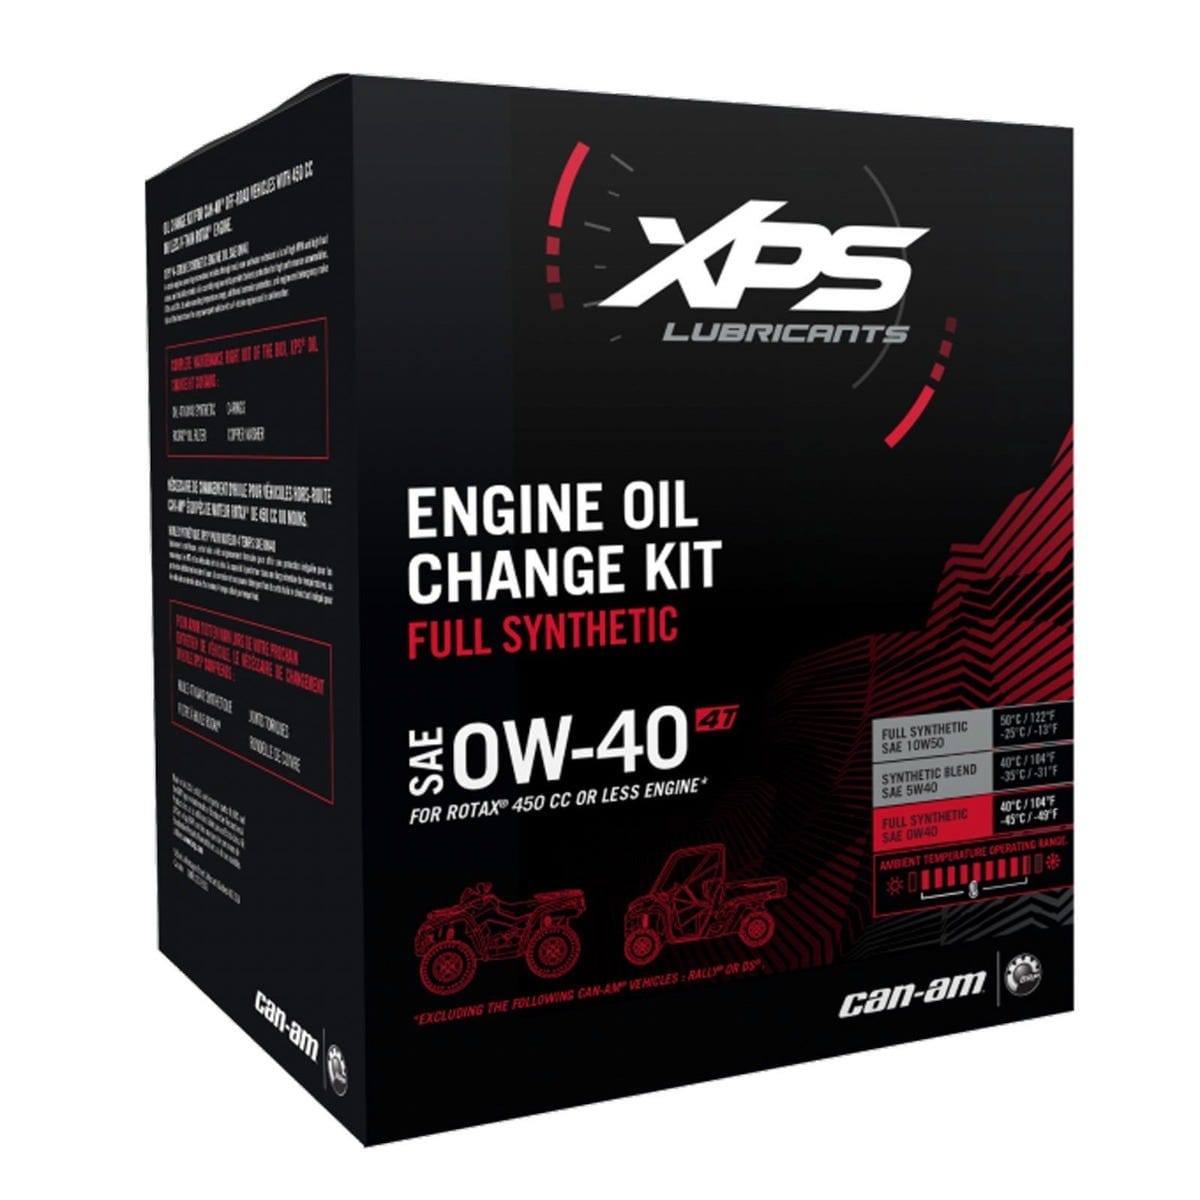 4T 0W-40 Synthetic Oil Change Kit for Rotax 450 cc or less engine